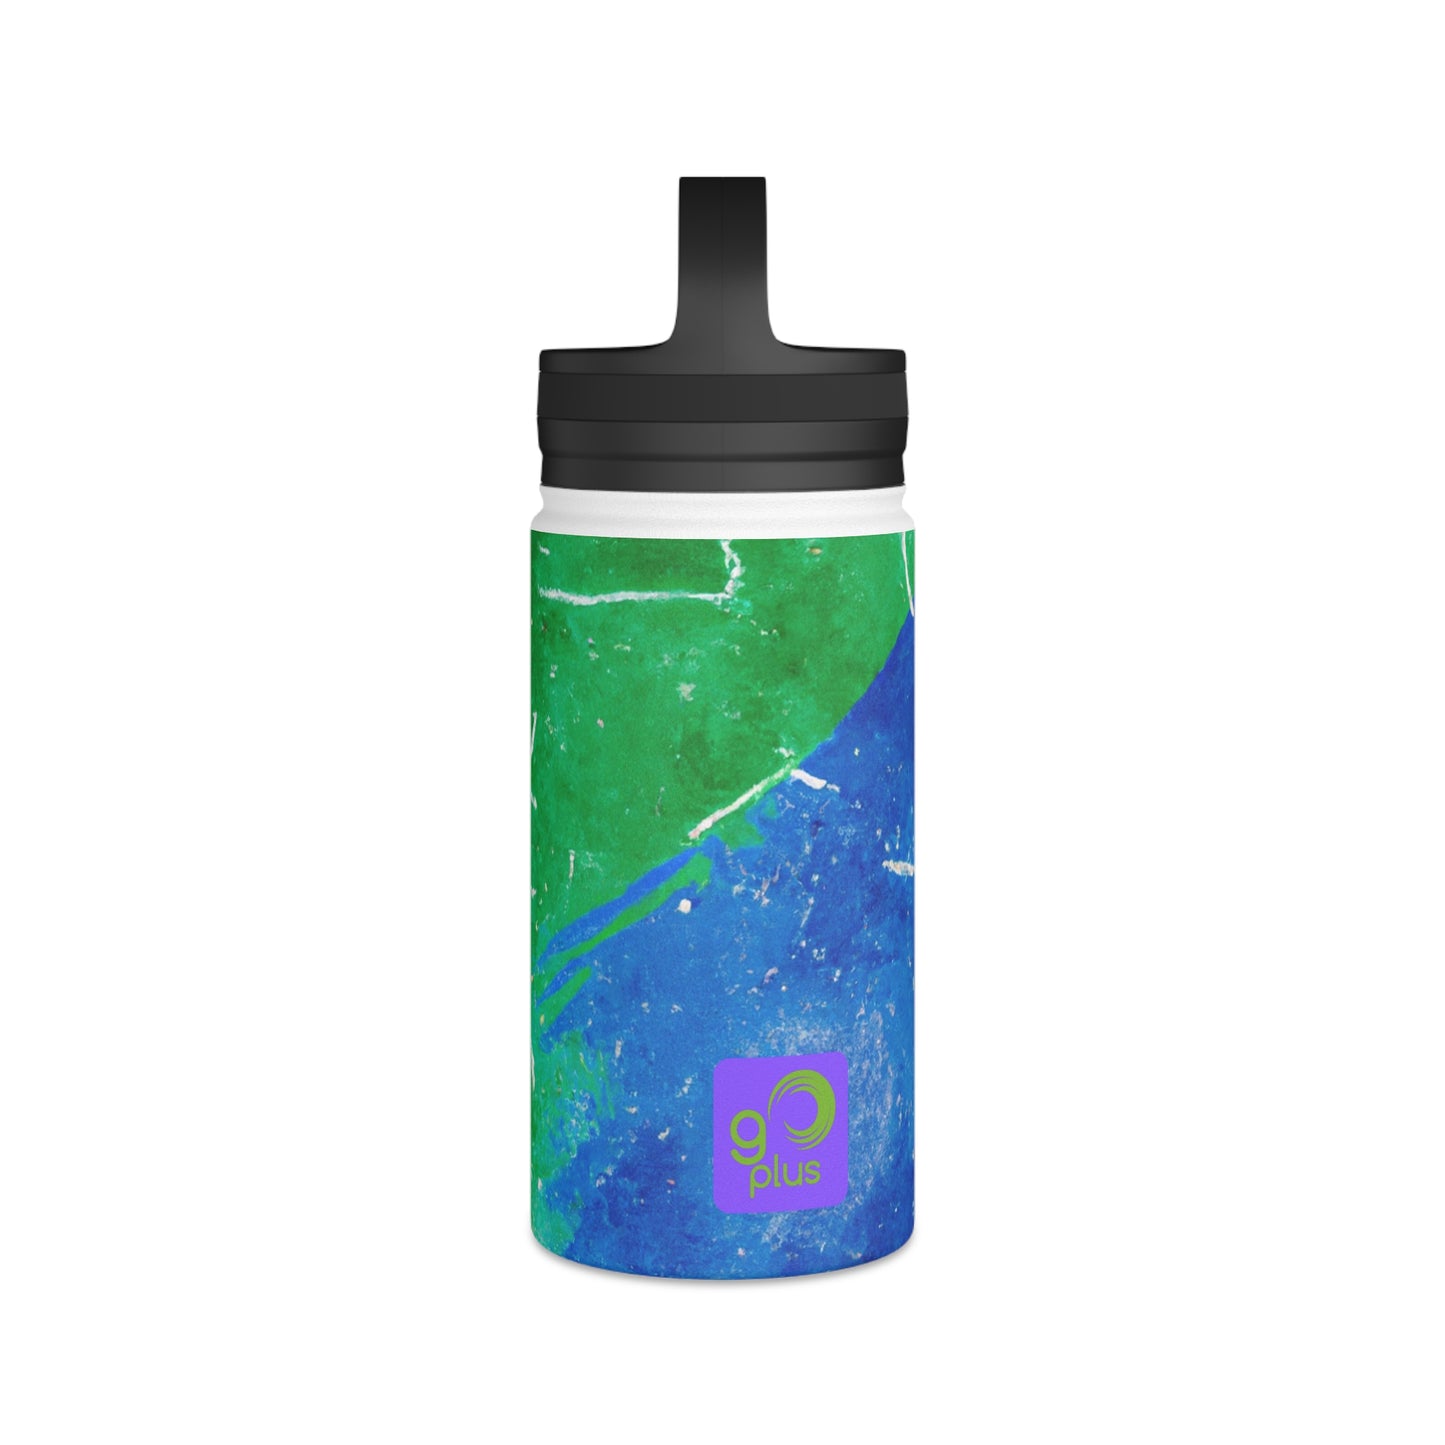 "Dynamic Sporting Spectacle: Capturing the Excitement of Your Favorite Sport!" - Go Plus Stainless Steel Water Bottle, Handle Lid